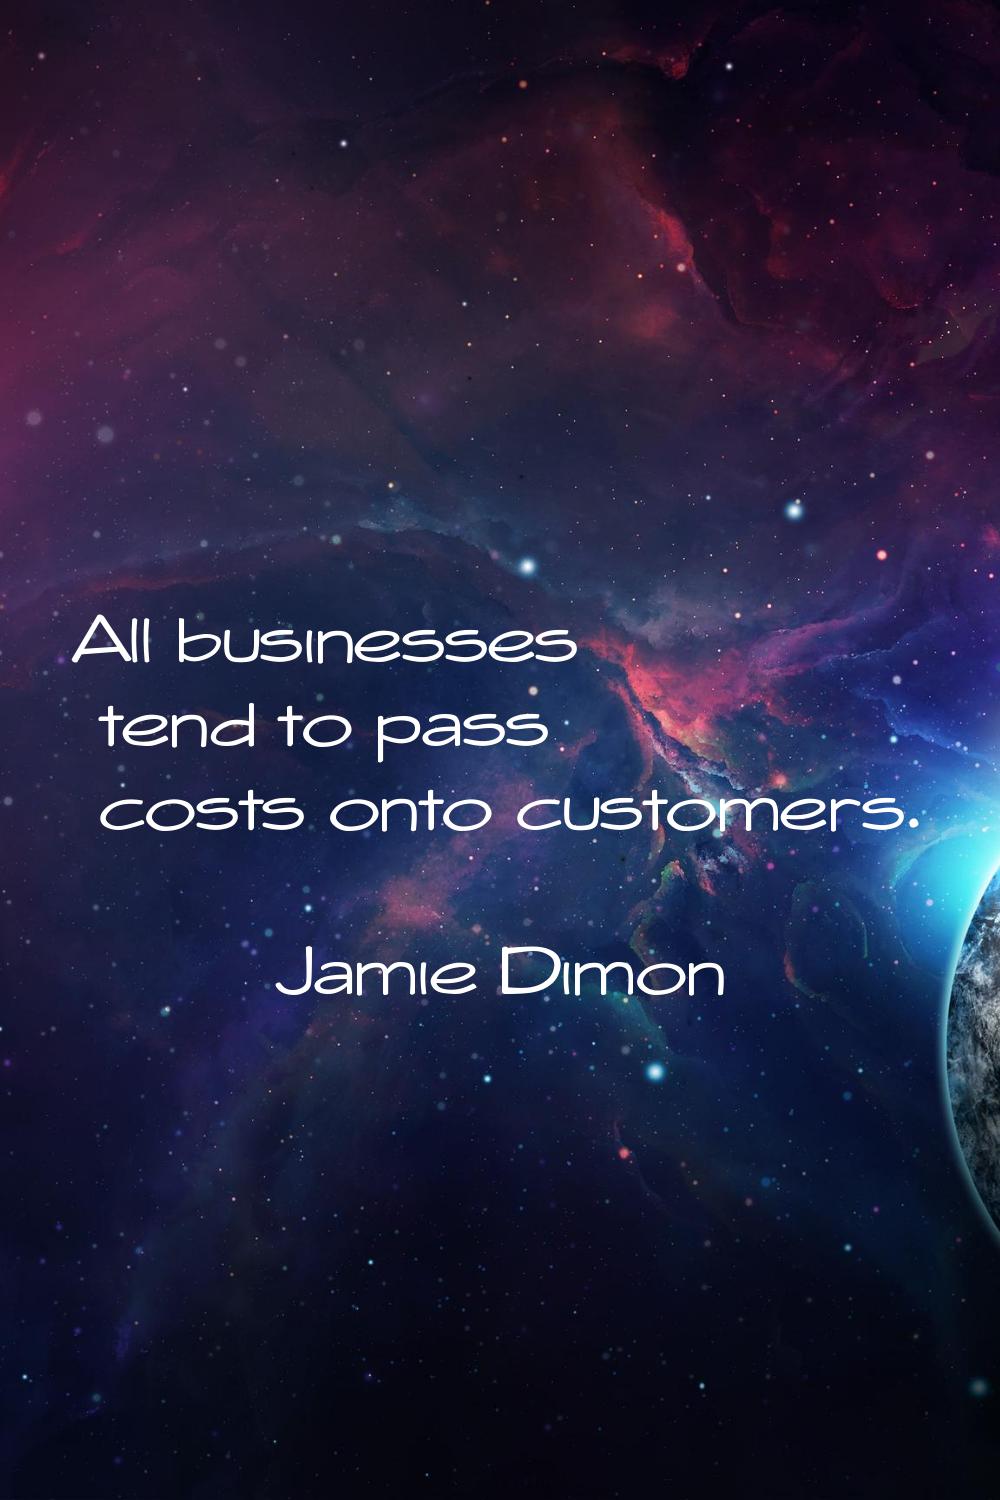 All businesses tend to pass costs onto customers.